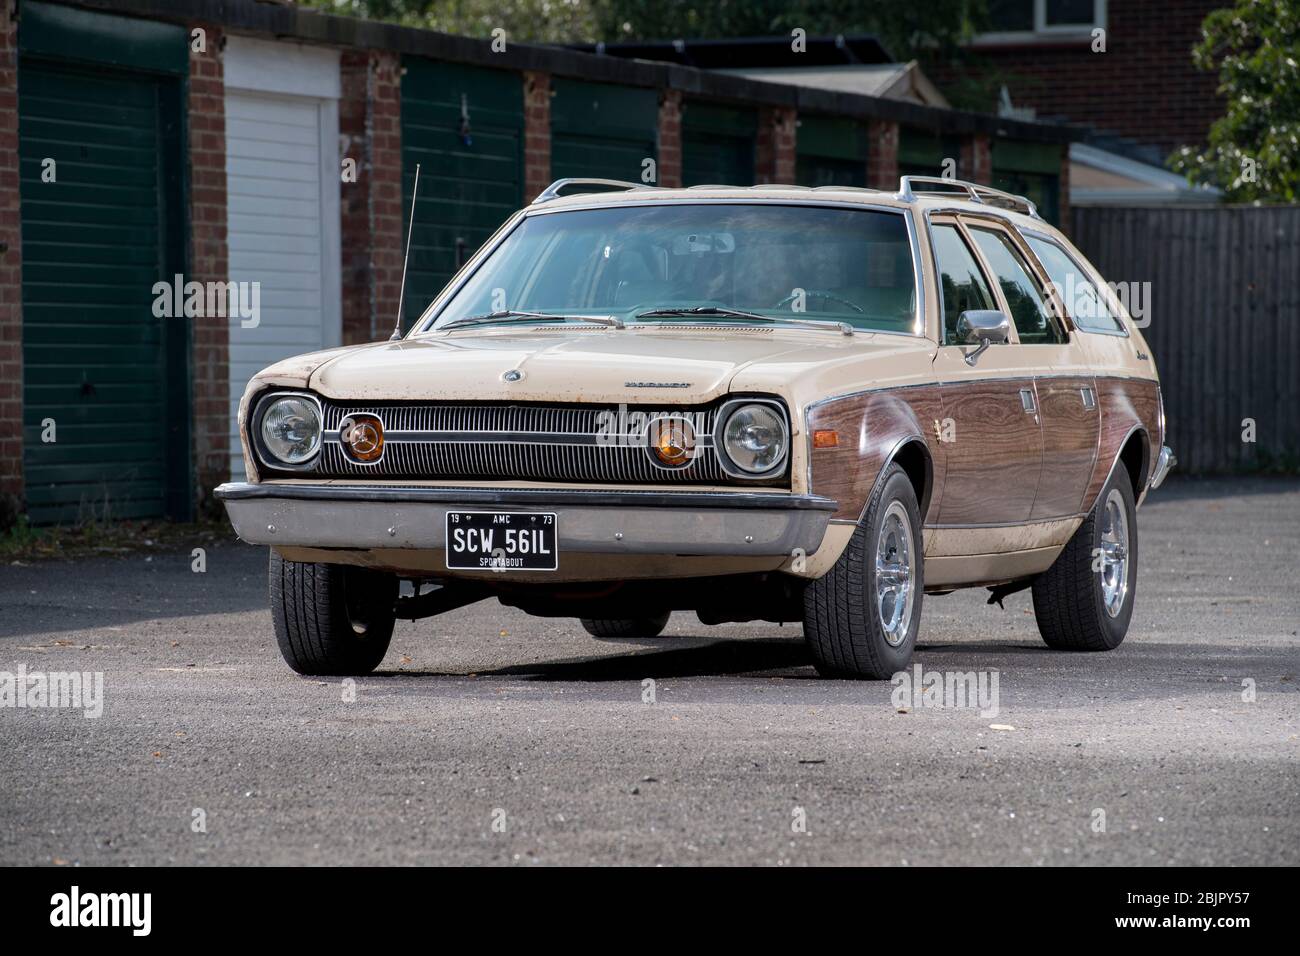 1973 AMC Hornet 'Gucci' special edition classic American station wagon car Stock Photo